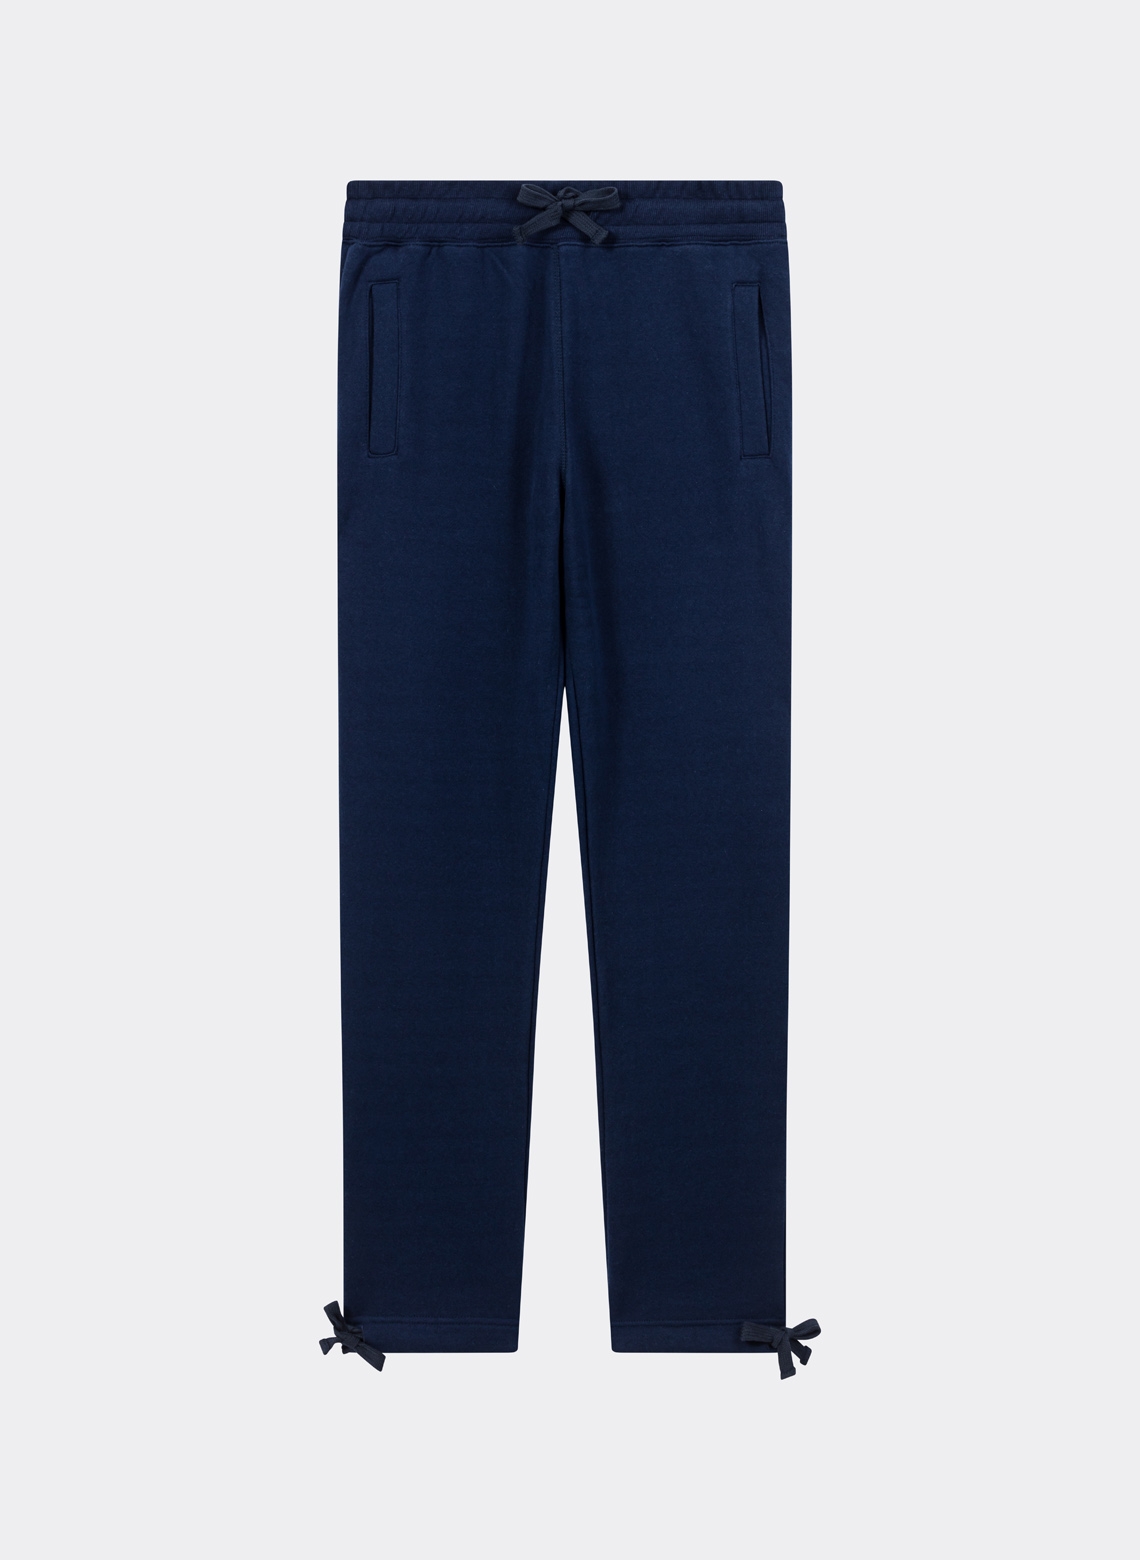 Elevation Store Paris - Japanese French Terry Sweatpants